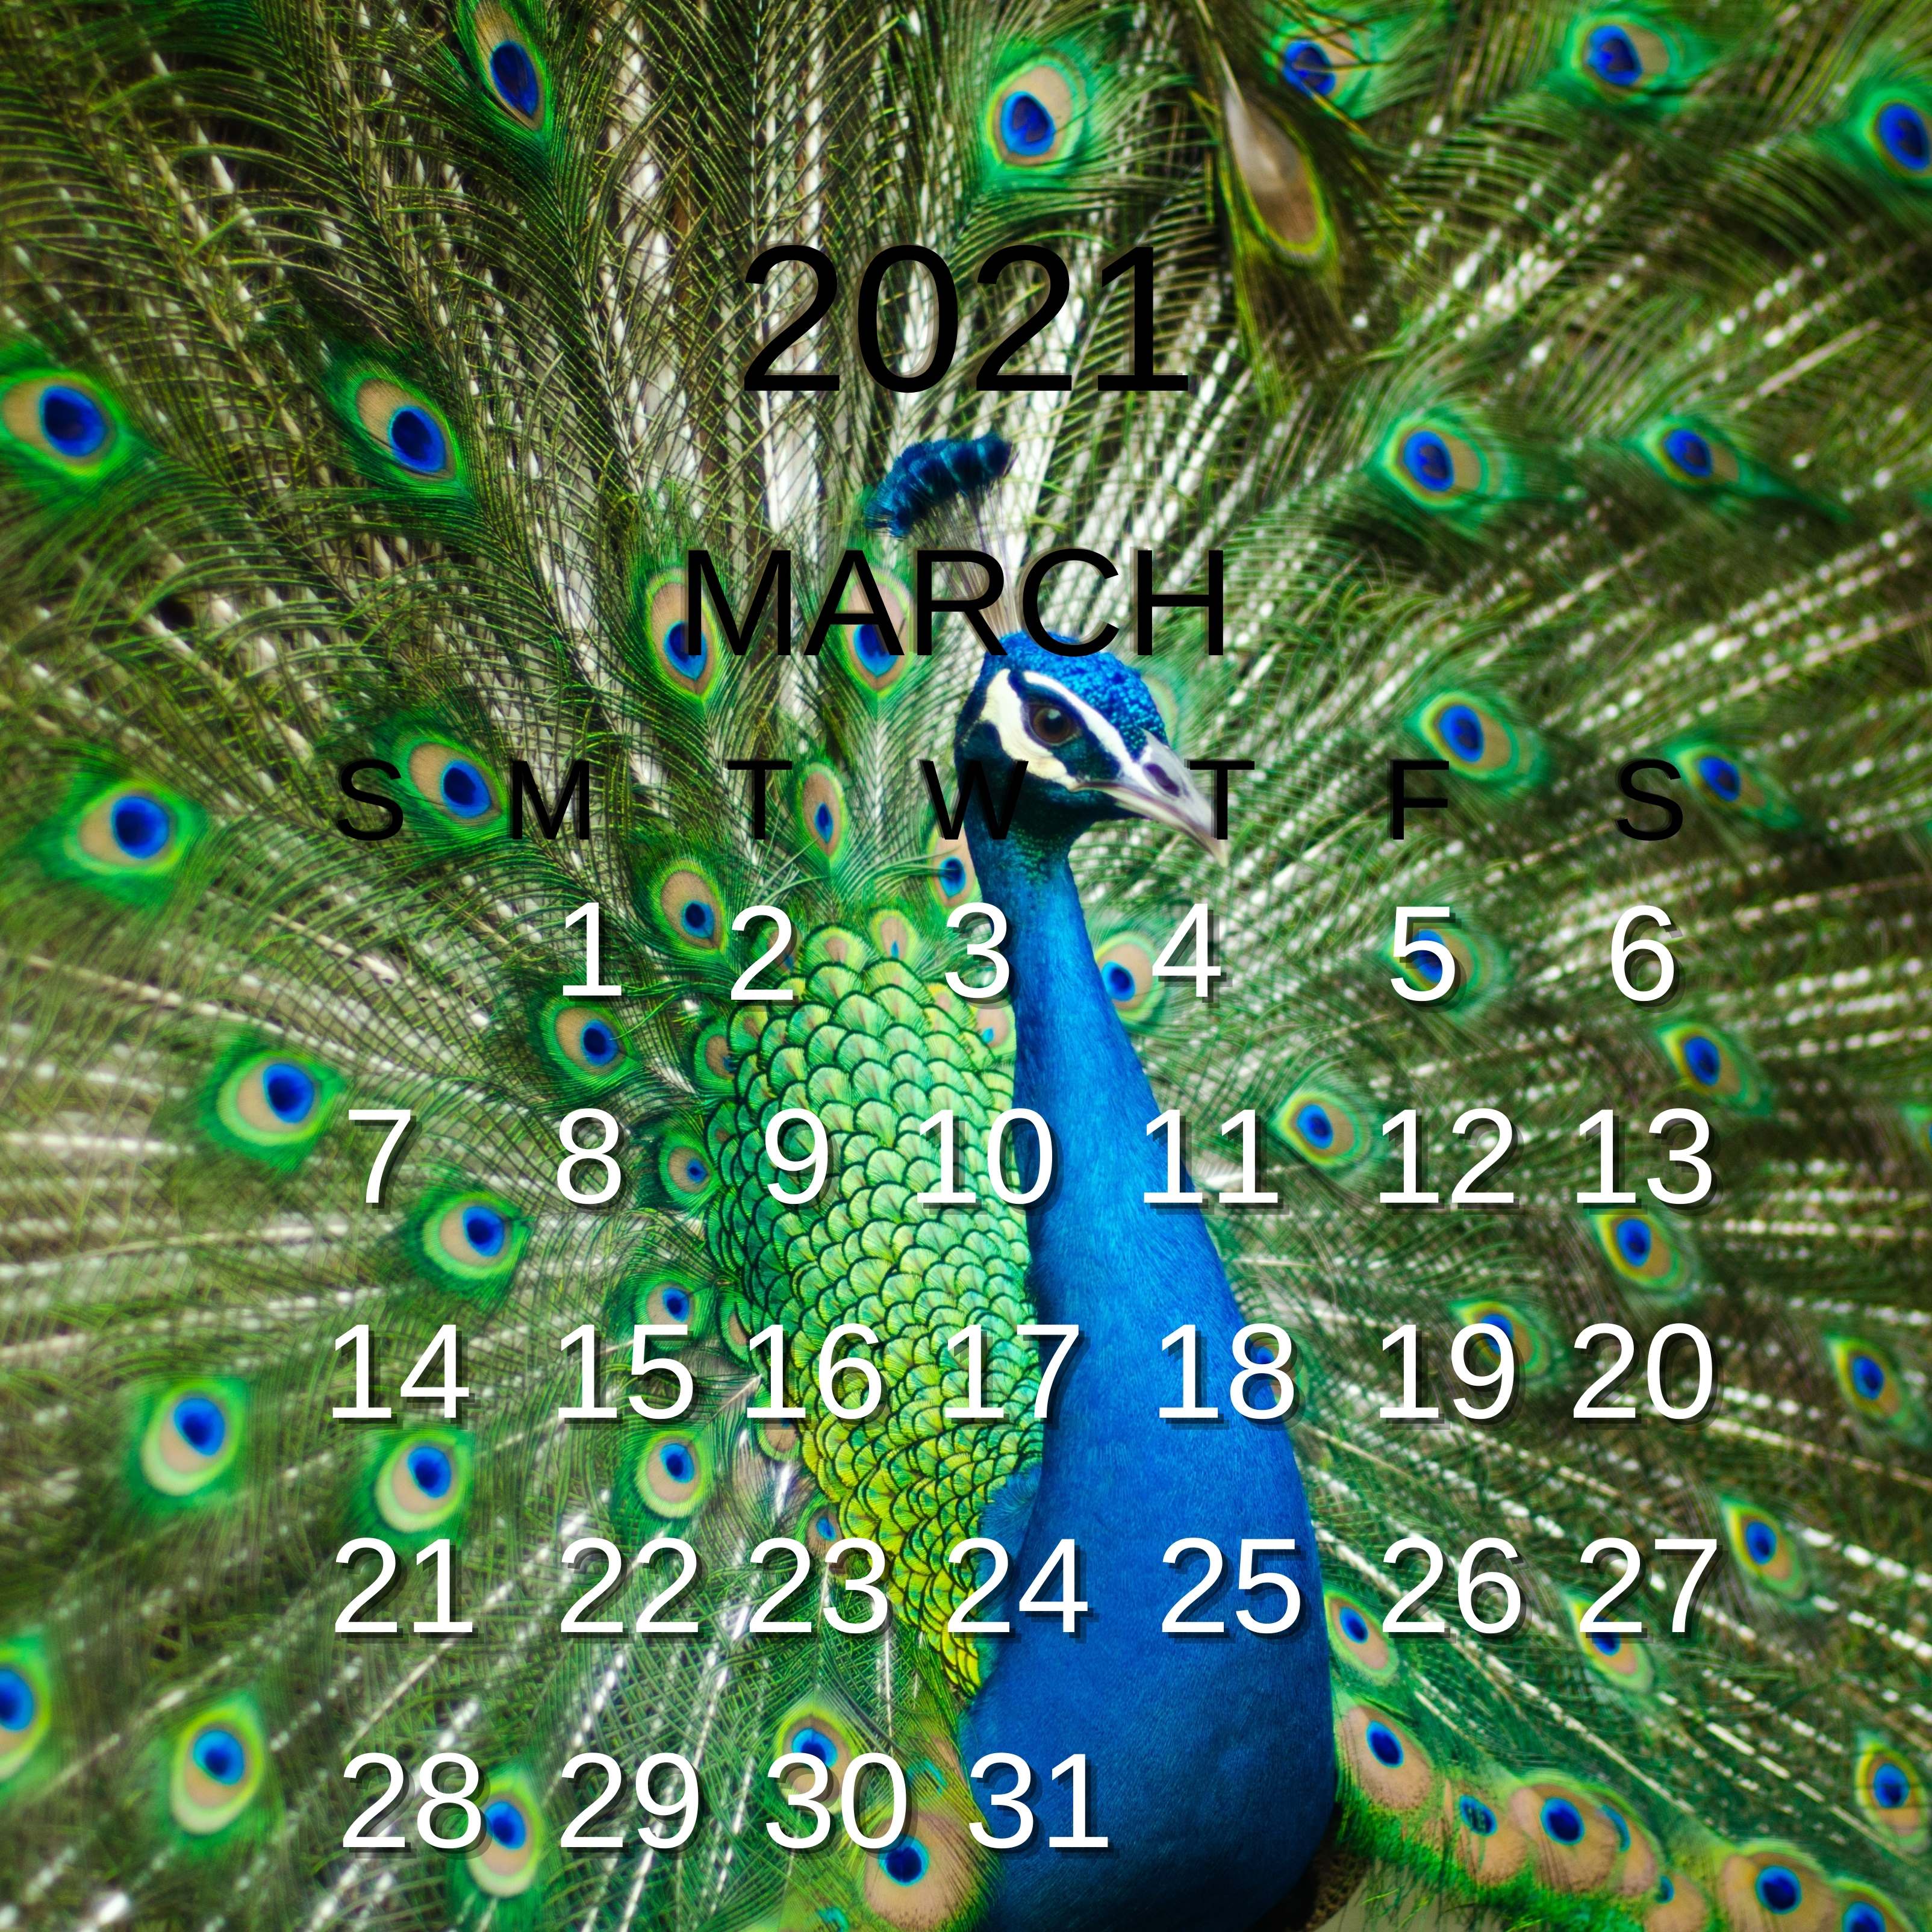 iPad Wallpapers March 2021 Calendar Peacock Feather Colorful iPad Wallpaper 3208x3208 px